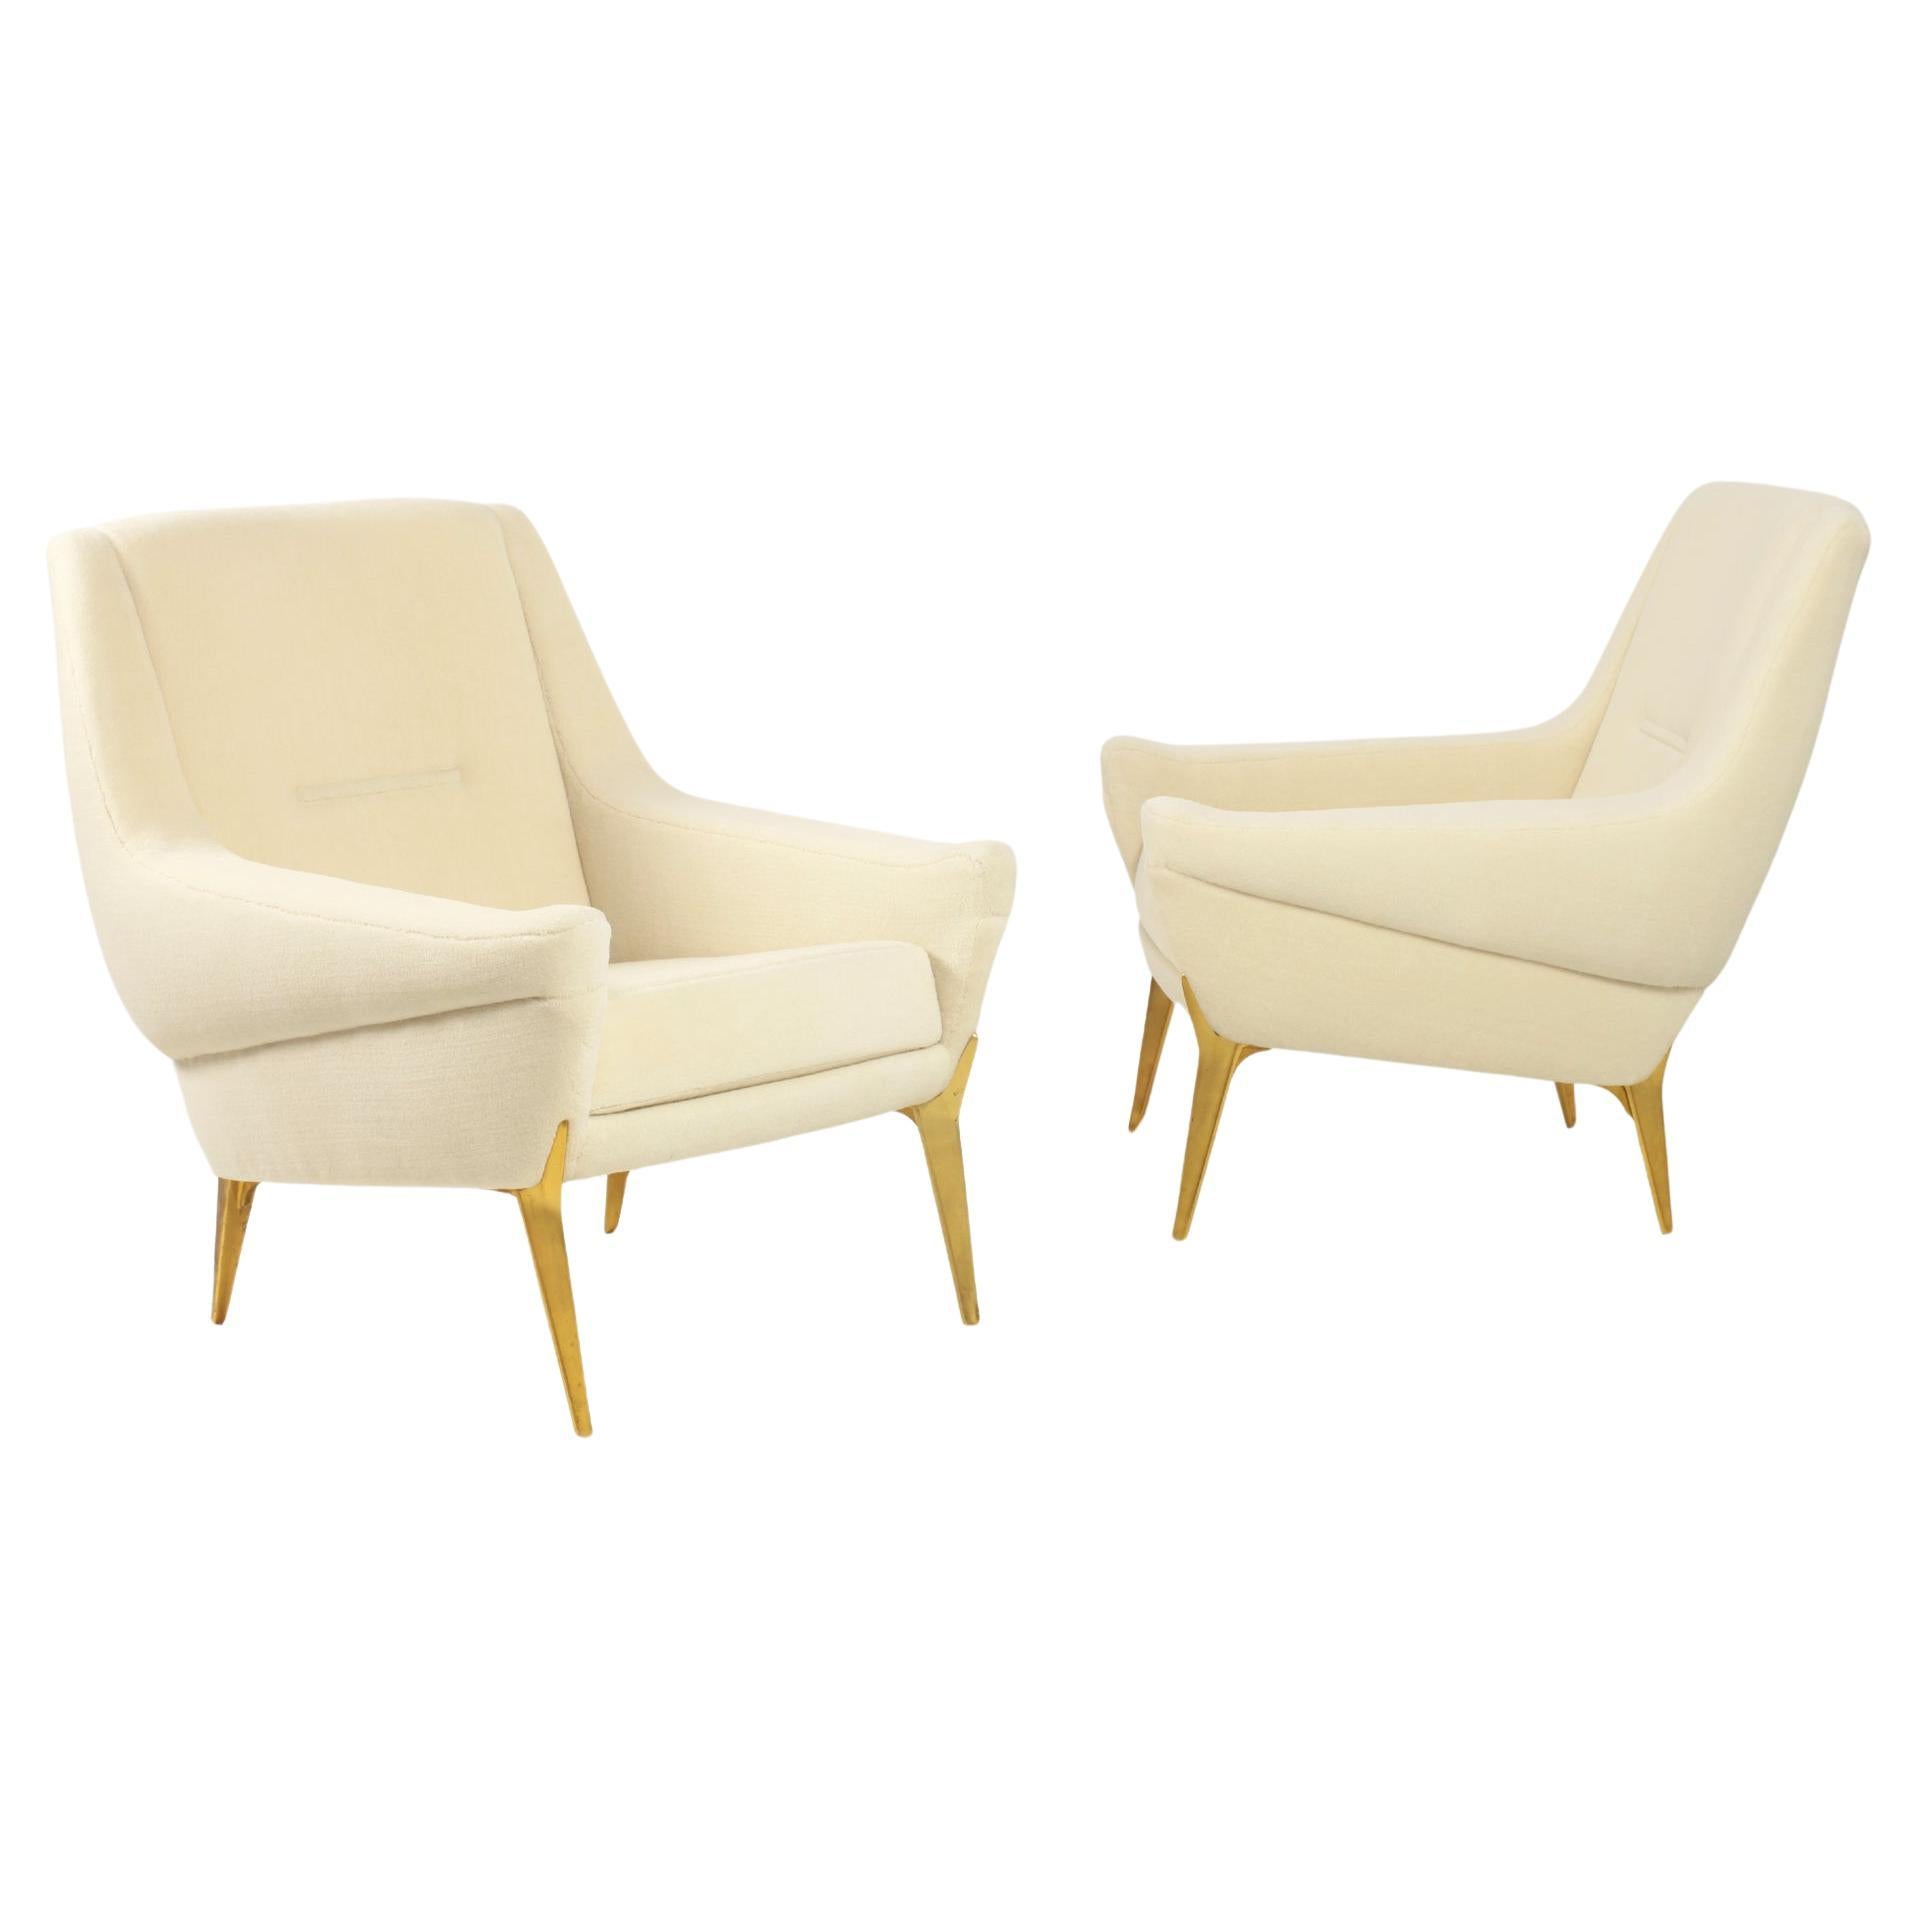 Pair of Armchairs by Charles Ramos for Castellaneta France 1950's For Sale